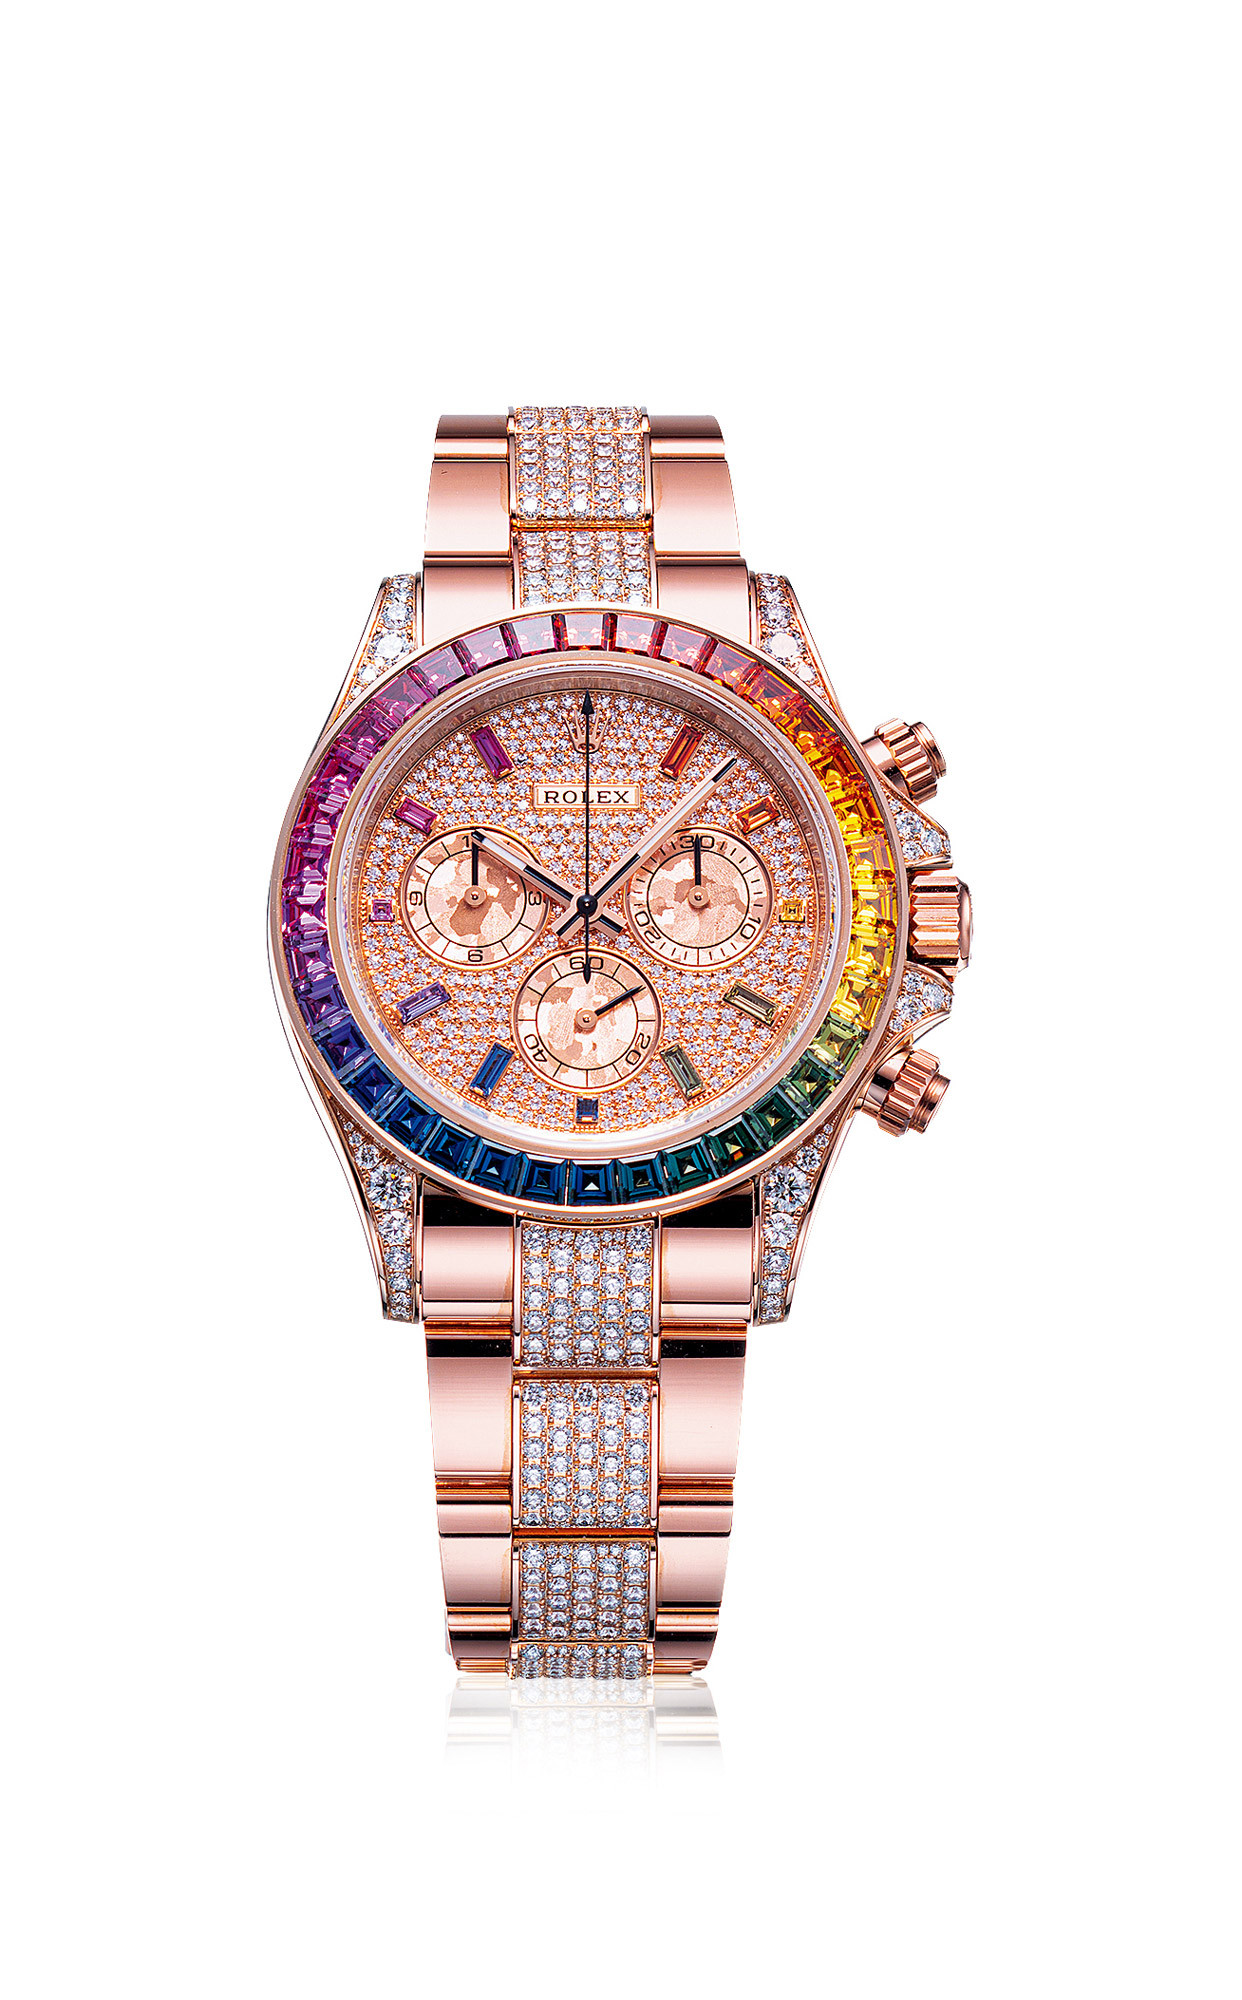 ROLEX AN ATTRACTIVE AND VERY FINE ROSE GOLD，DIAMOND AND RAINBOW SAPPHIRE-SET CHRONOGRAPH AUTOMATIC BRACELET WATCH，WITH SMALL SECONDS ，ACCOMPANIED WITH CERTIFICATE OF ORIGIN AND PRESENTATION BOX